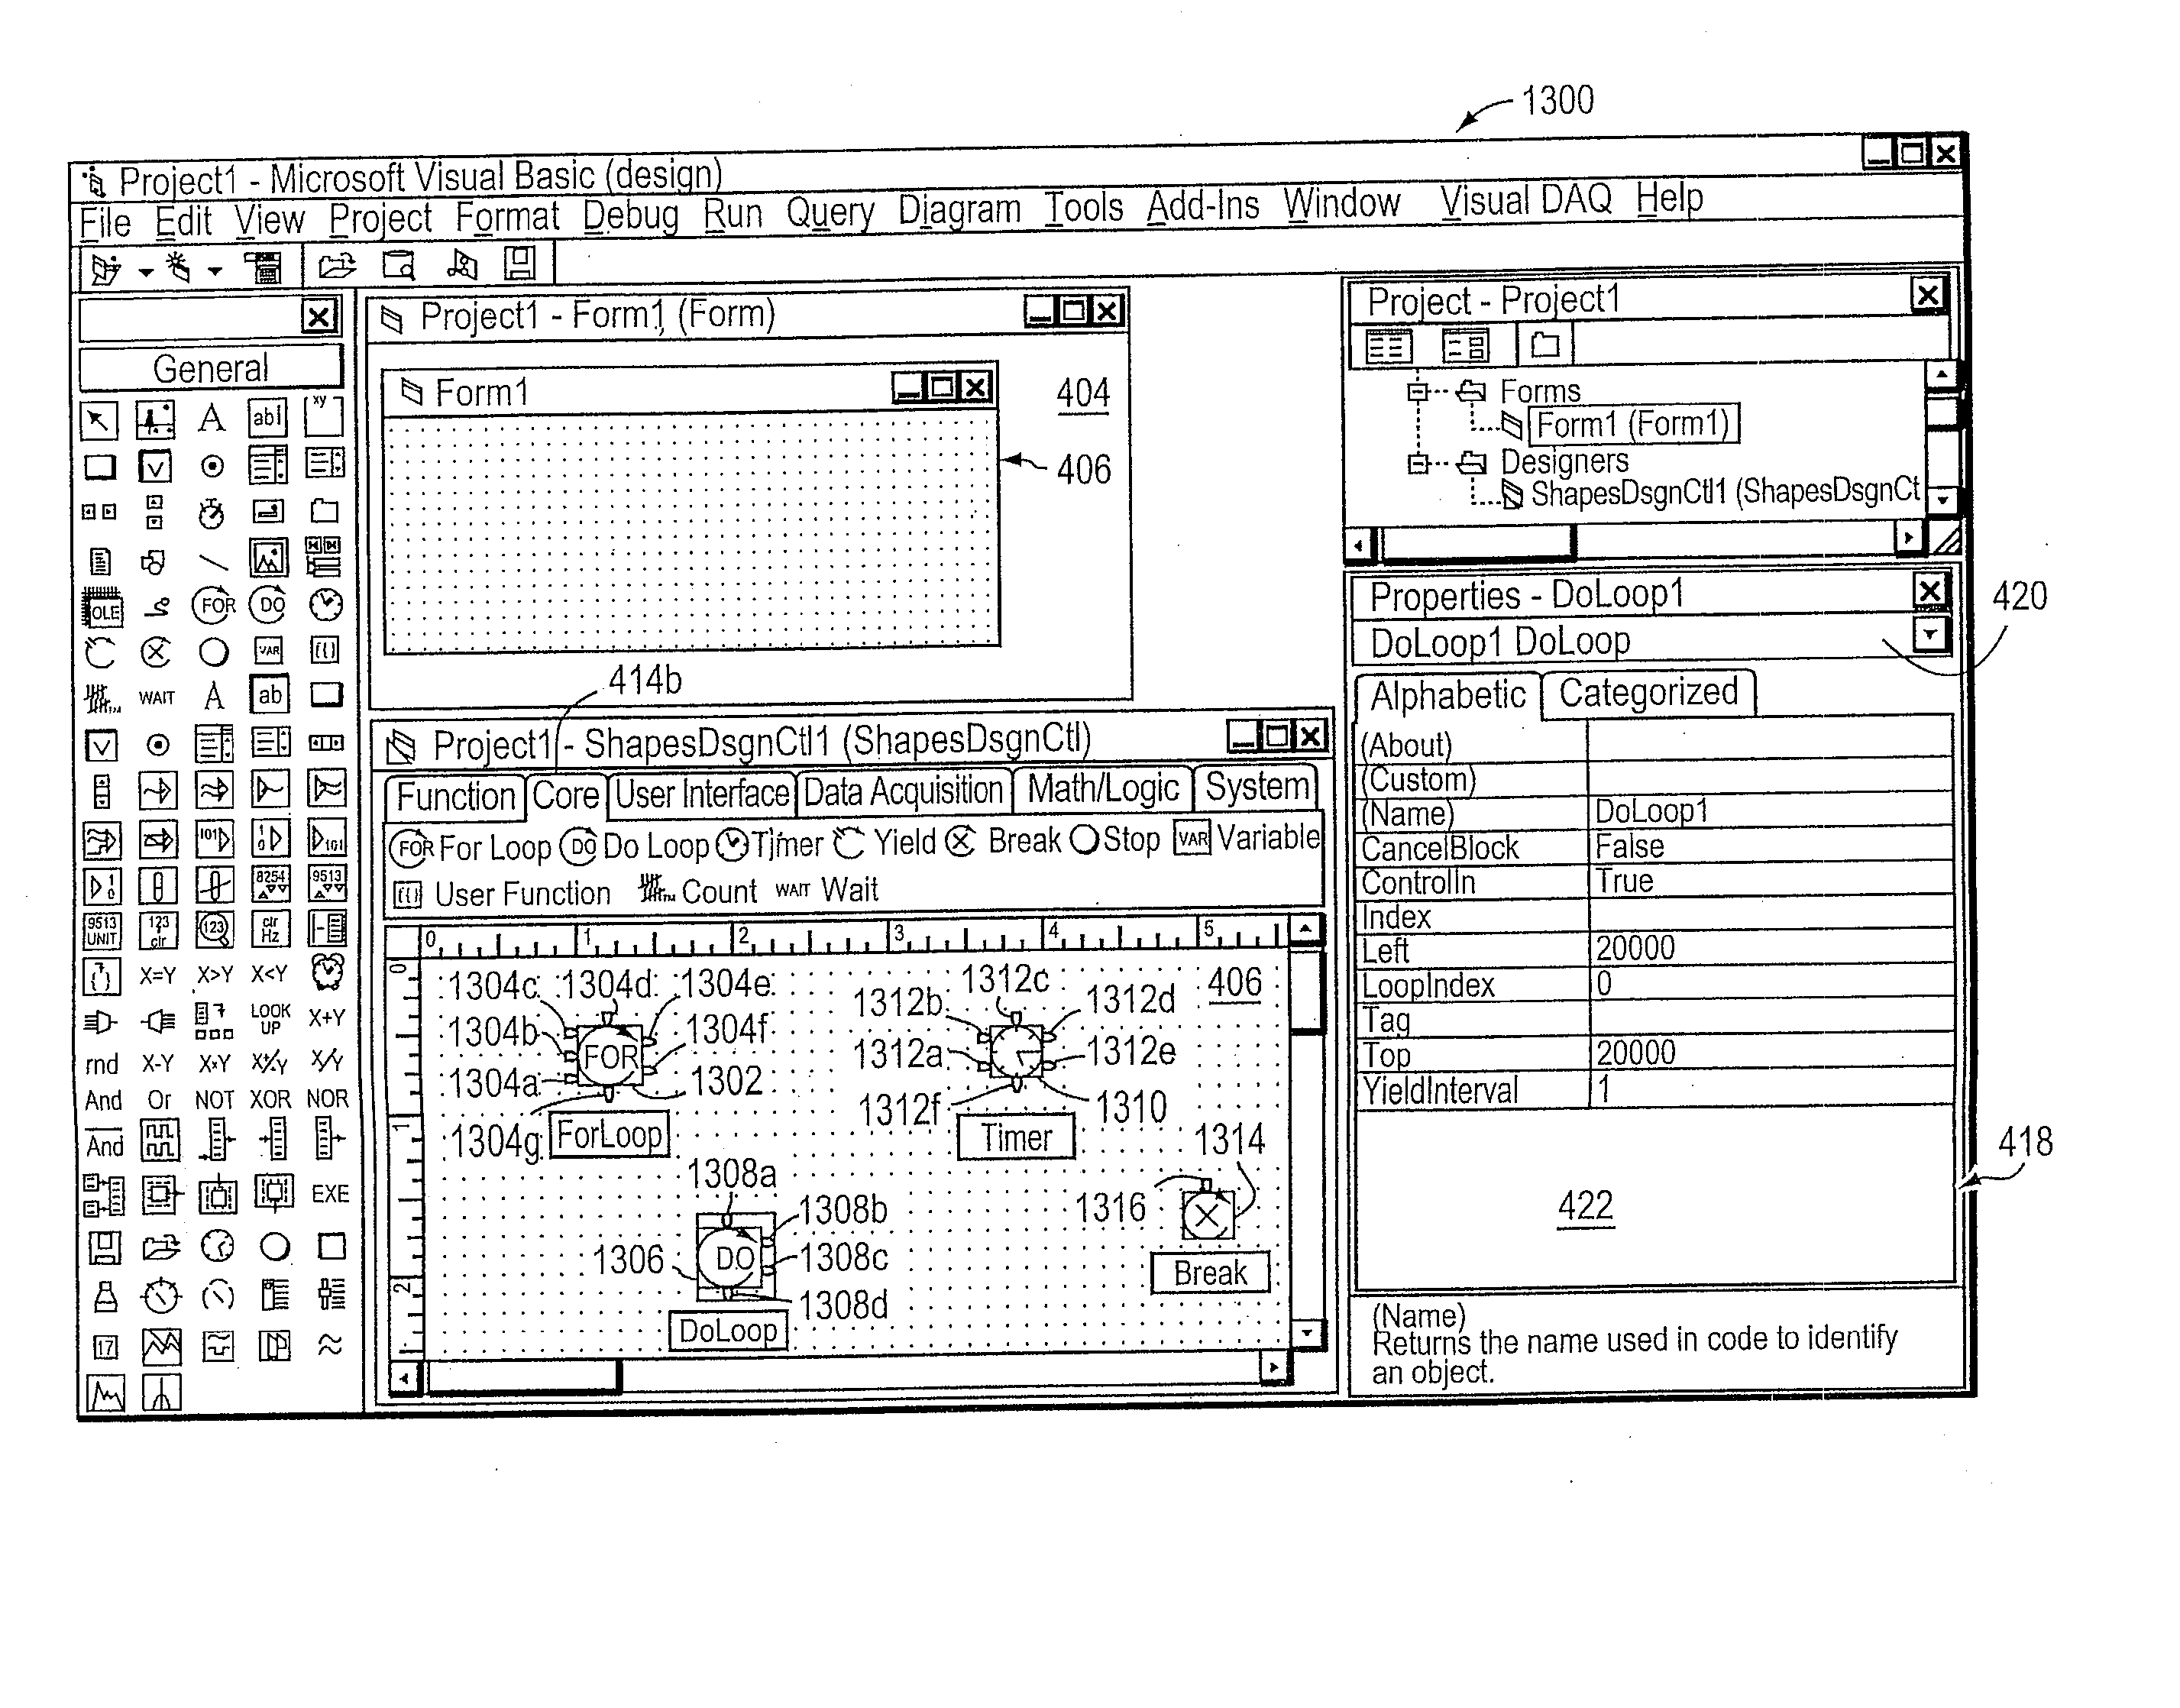 Graphical Program Having Graphical and/or Textual Specification of Event Handler Procedures for Program Objects